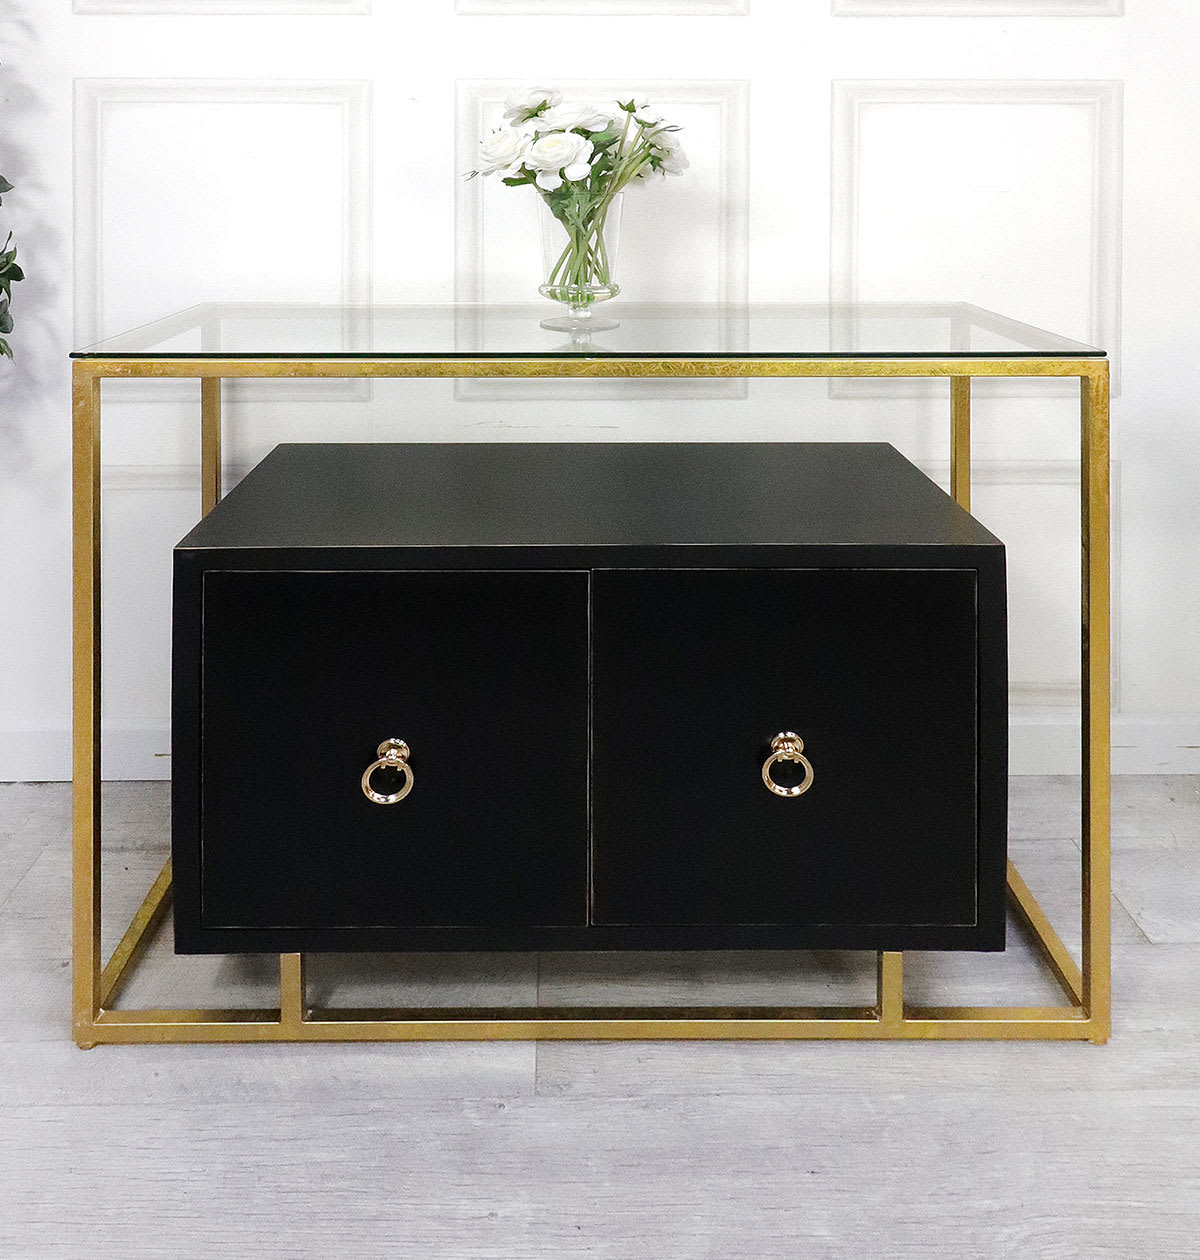 Gold and Black Suspended Cabinet